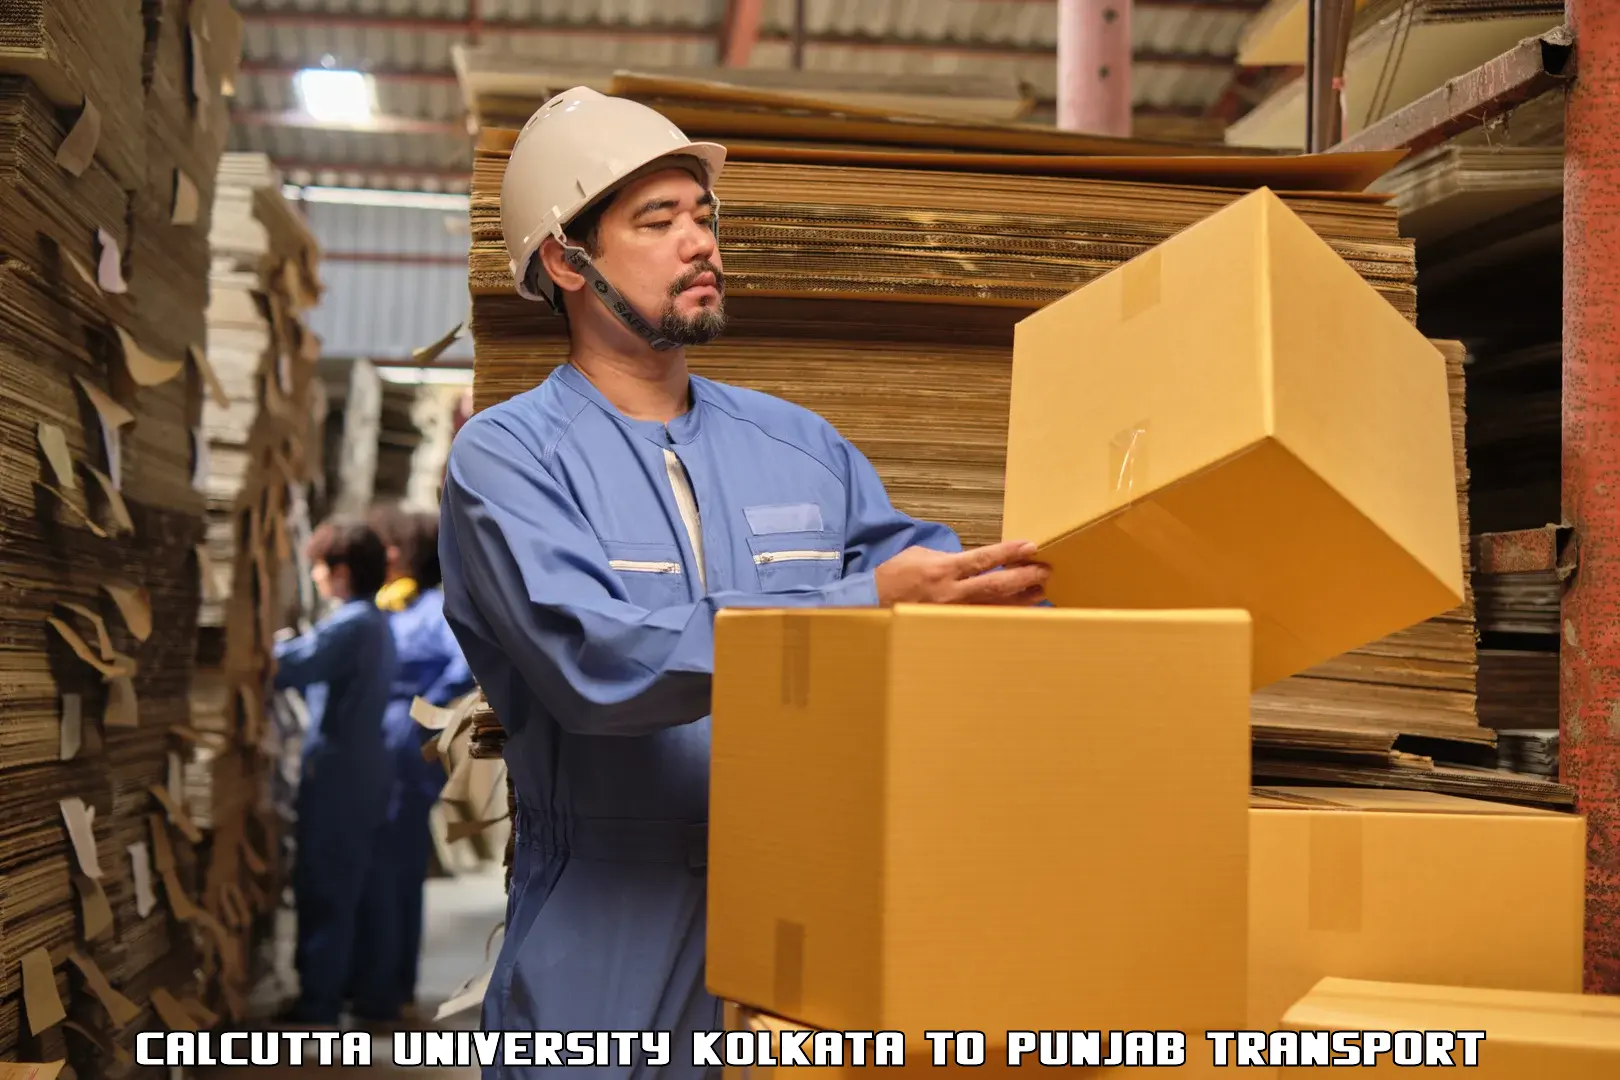 Package delivery services Calcutta University Kolkata to Zirakpur